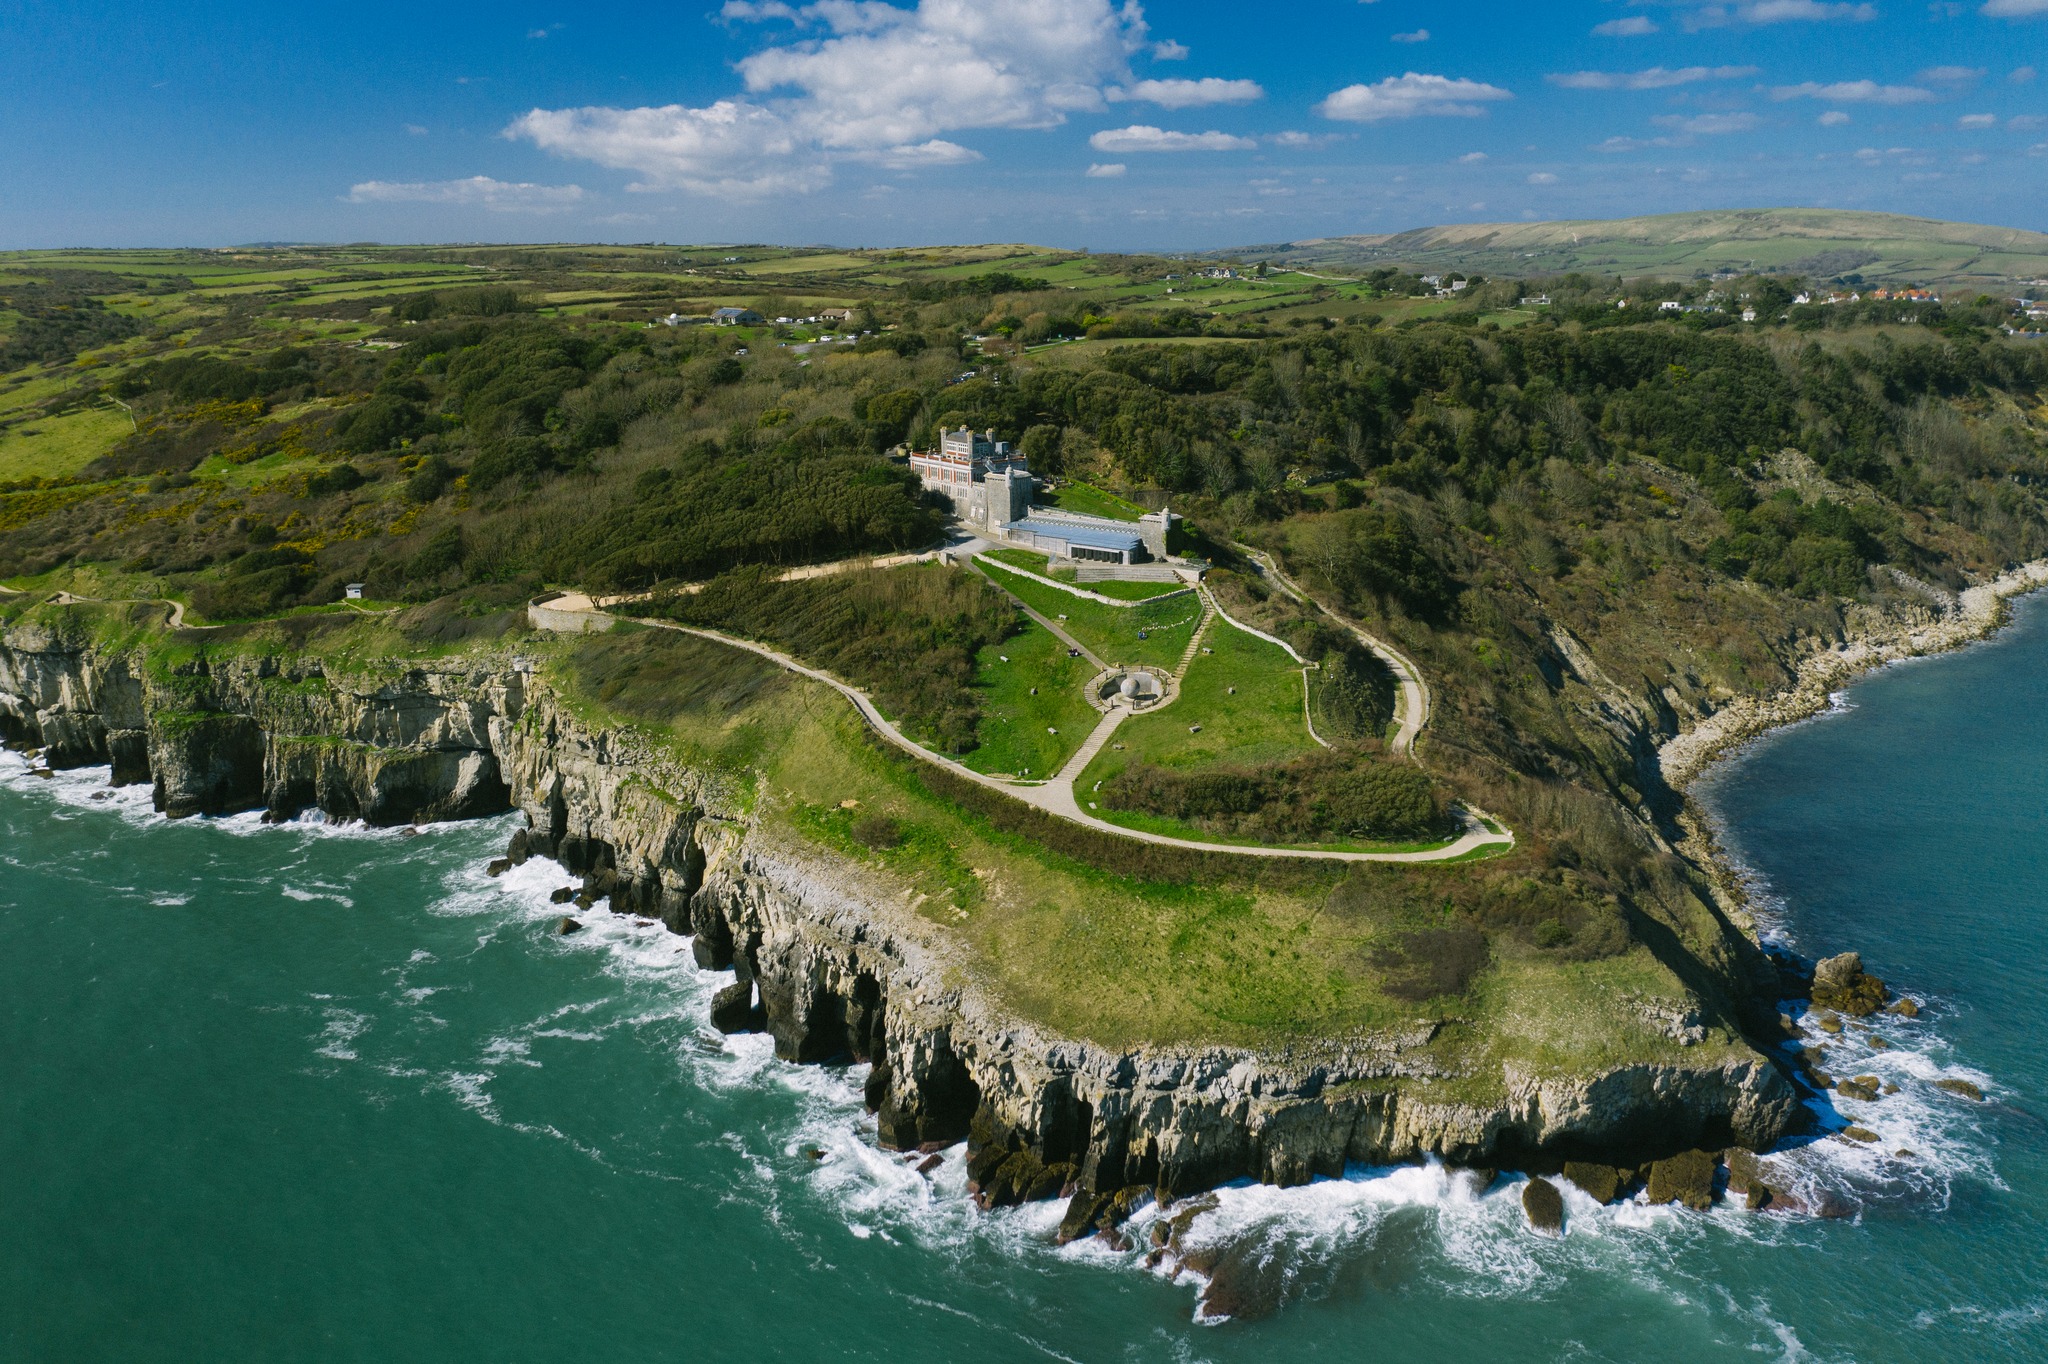 The new 2026 dates for Durlston Castle have just been added 🎉
Visit our website to request a brochure or to arrange a tour of this majestic wedding venue. We still have 2 dates for 2025 so please don't hesitate and get in touch today 📧 (📸 By Harbour Media)  #weddingvenue #dorsetweddings #dorsetweddingvenue #weddingreception #weddingplanner #wedding